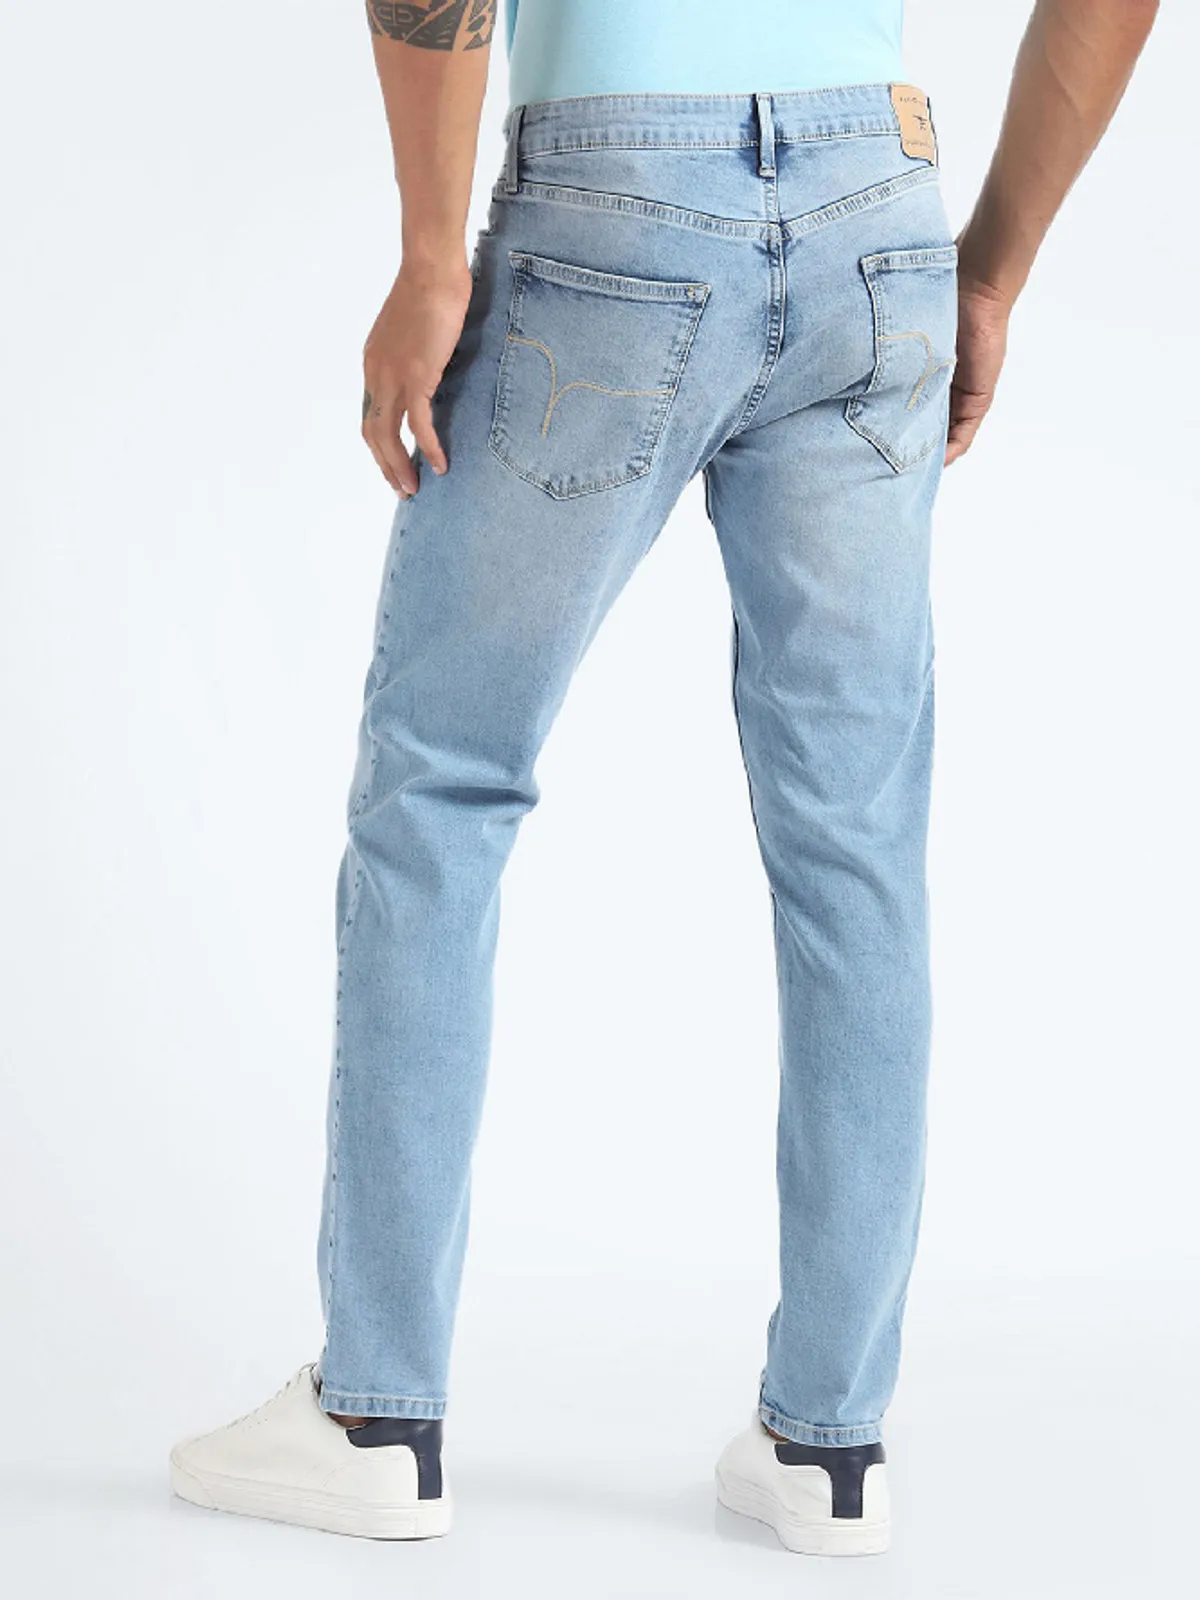 Flying Machine sky blue slim tapered fit jeans